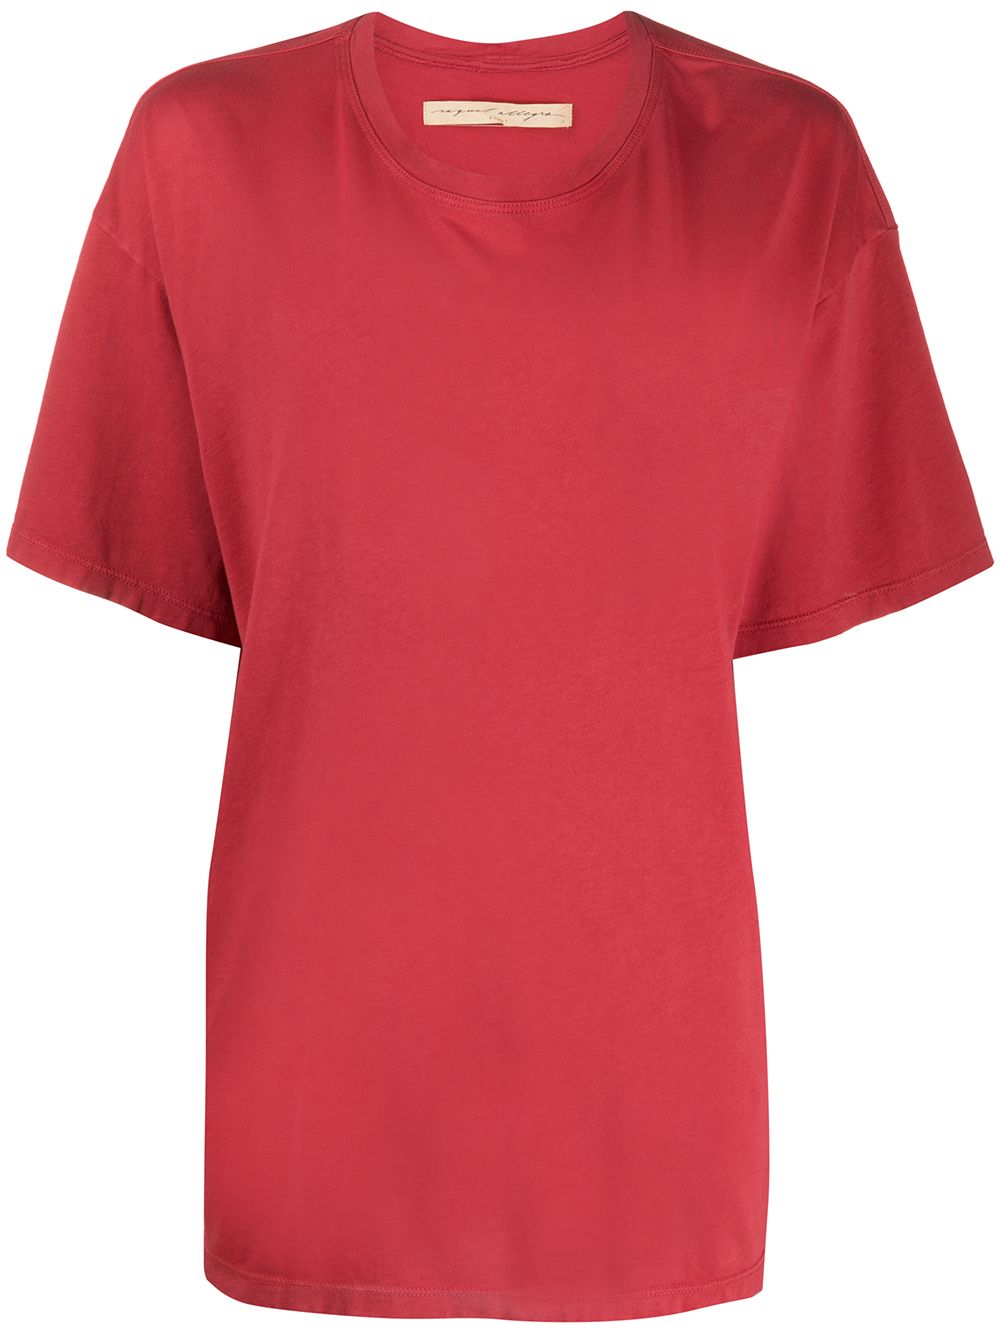 Raquel Allegra Short Sleeve Boxy Fit T-shirt In Red